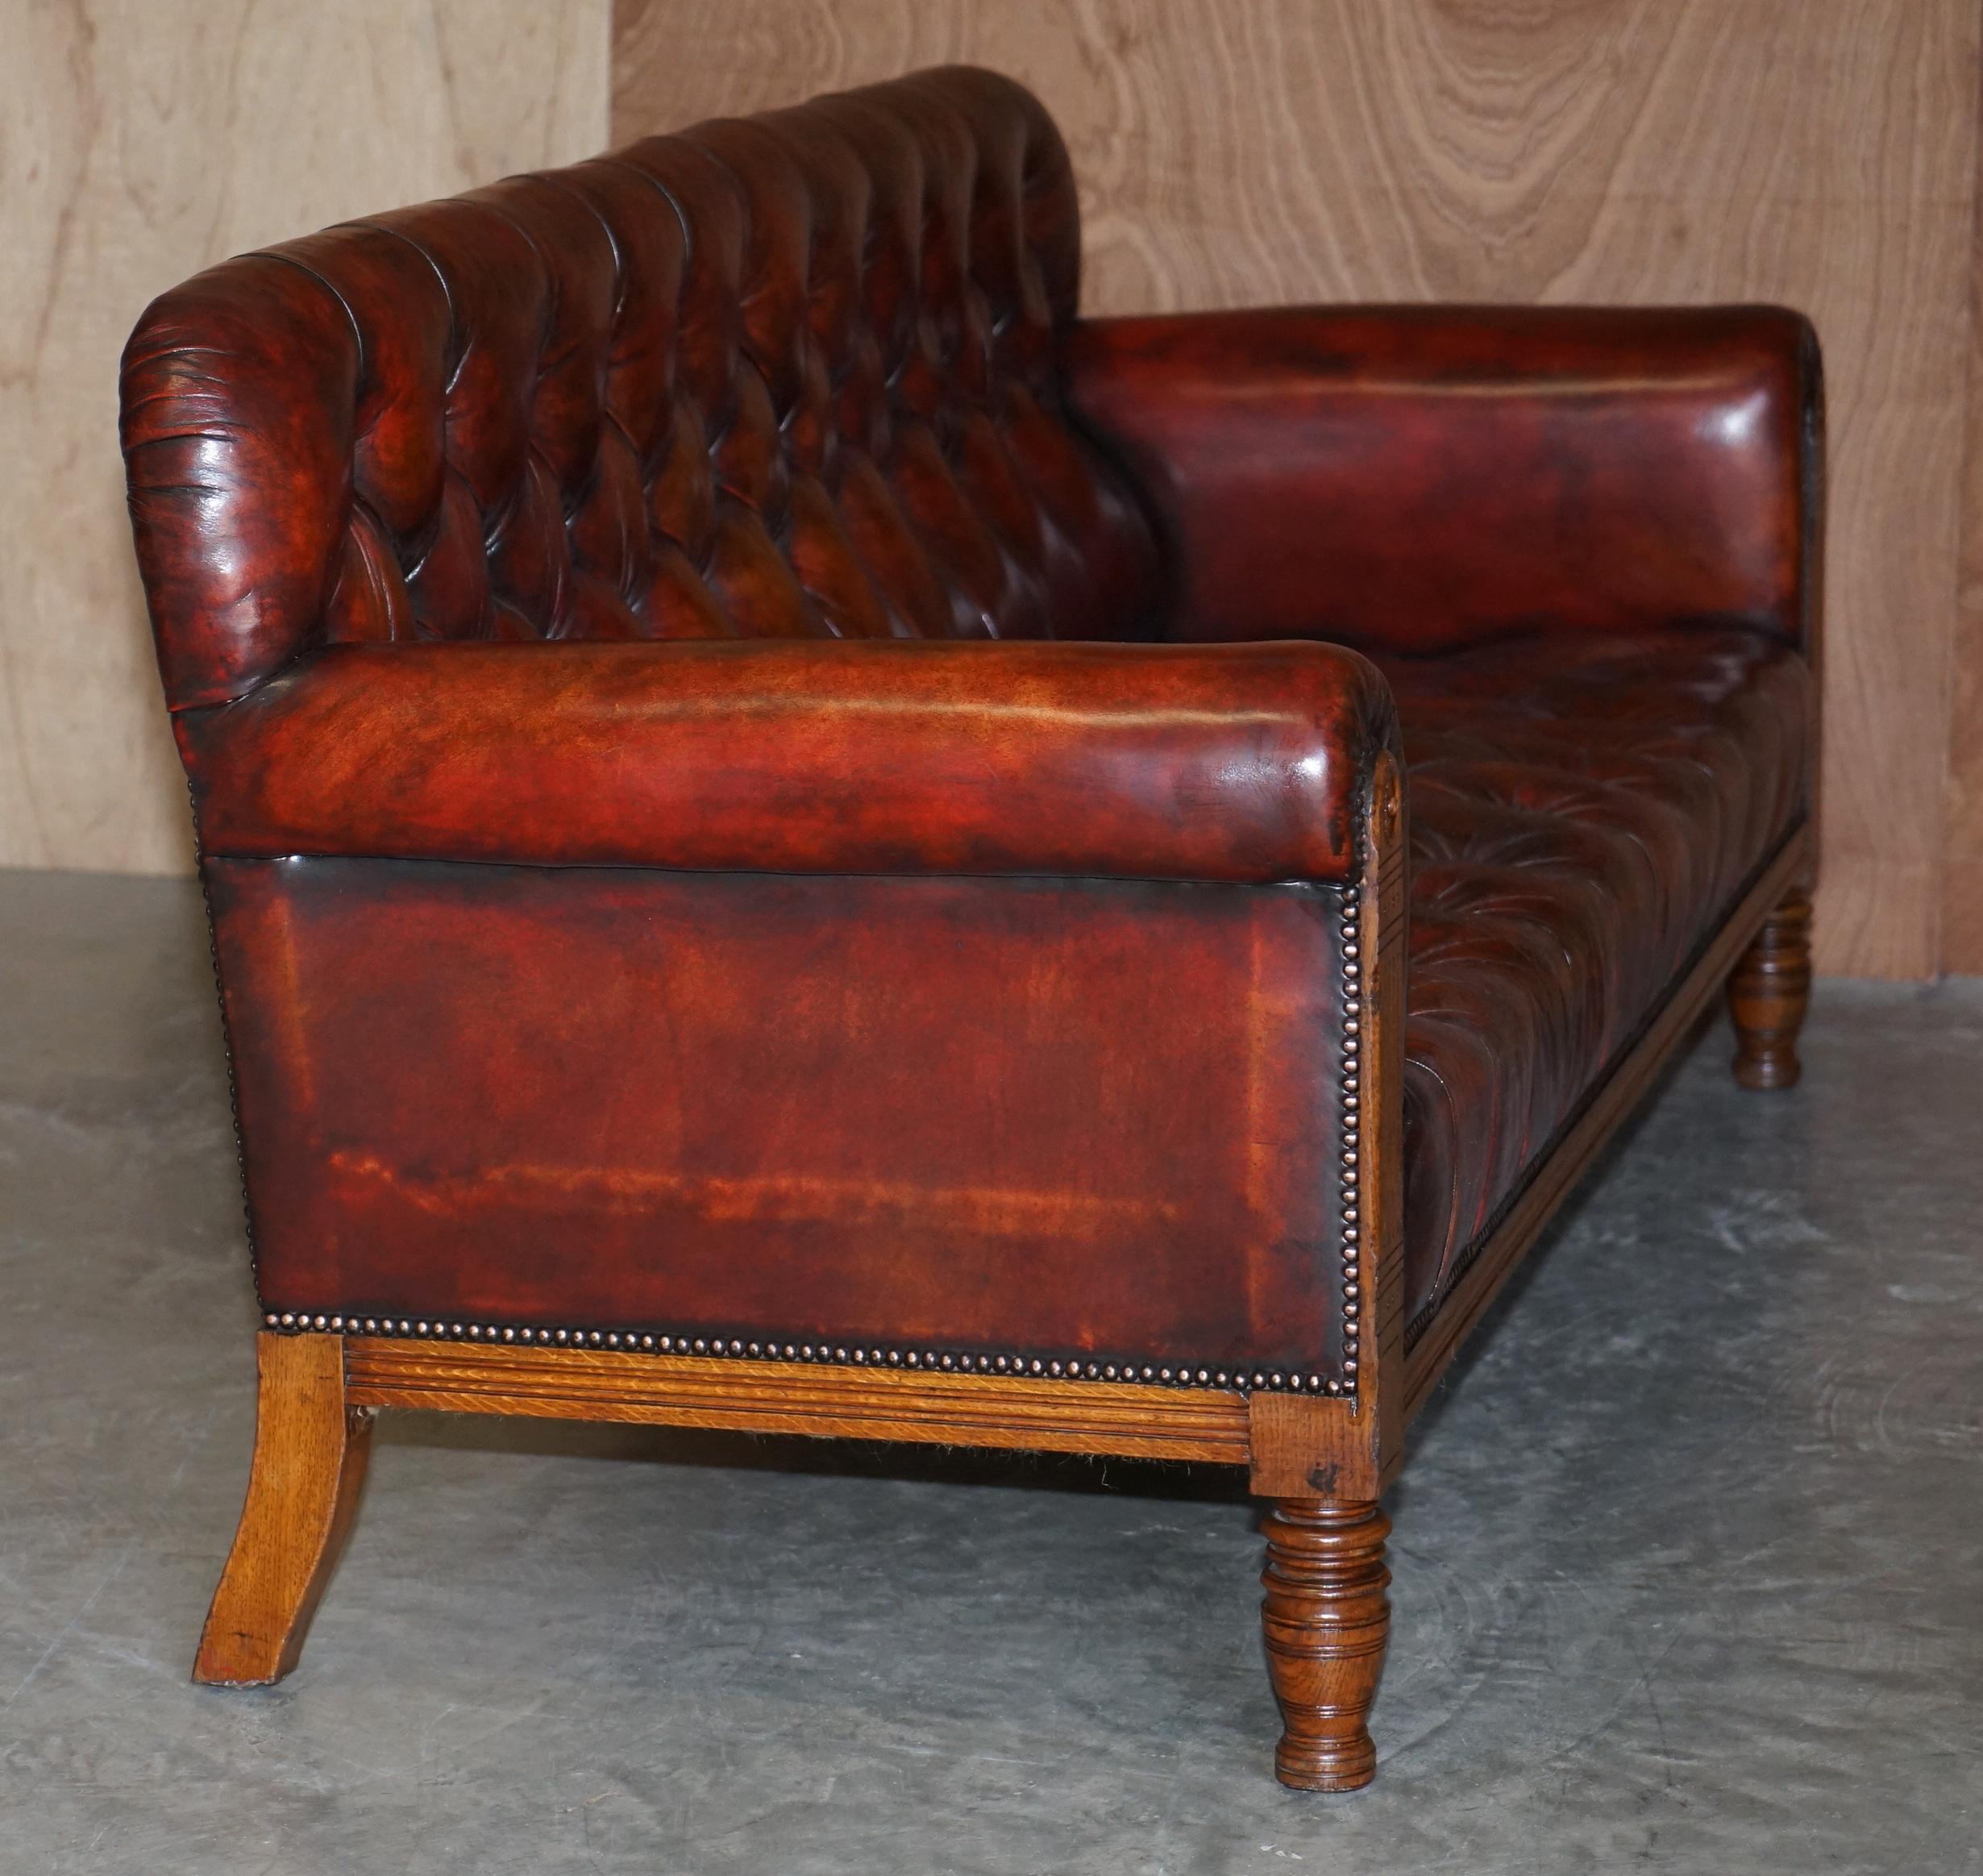 Exhibition Quality Wylie & Lochhead 1860 Glasgow Chesterfield Brown Leather Sofa For Sale 3